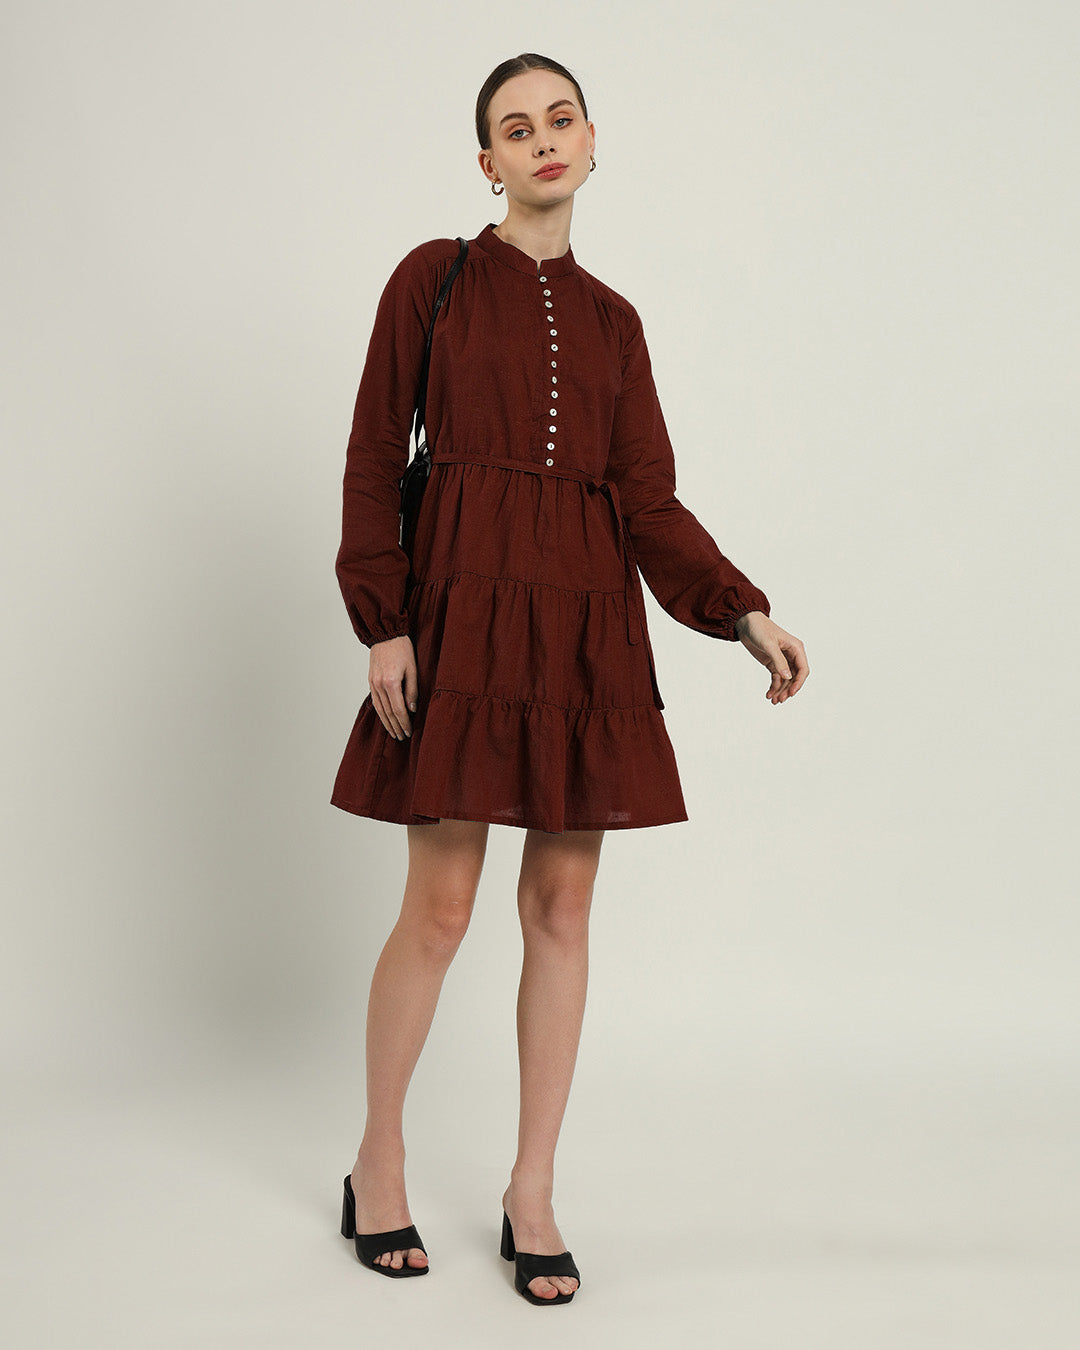 The Ely Rouge Dress